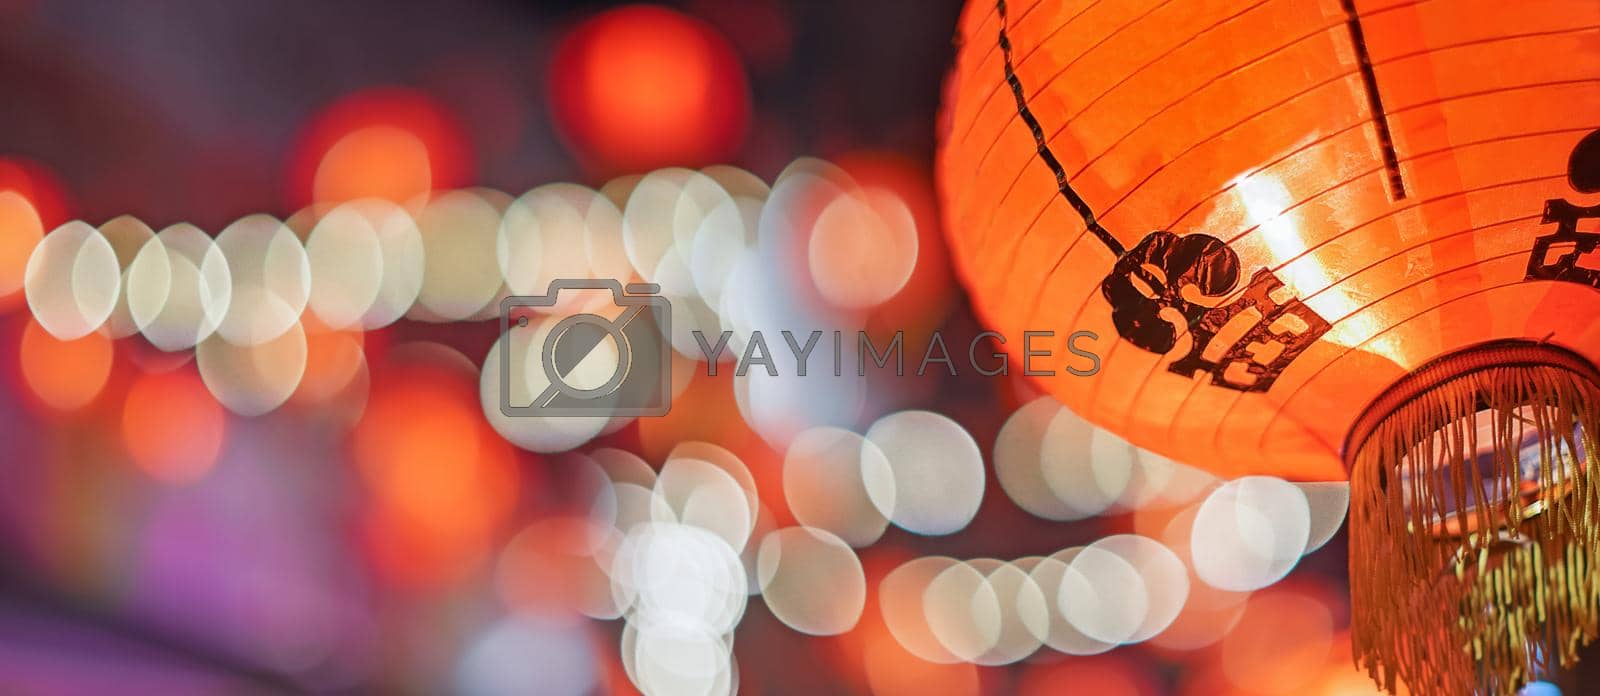 Royalty free image of Chinese new year lanterns in china town. by toa55